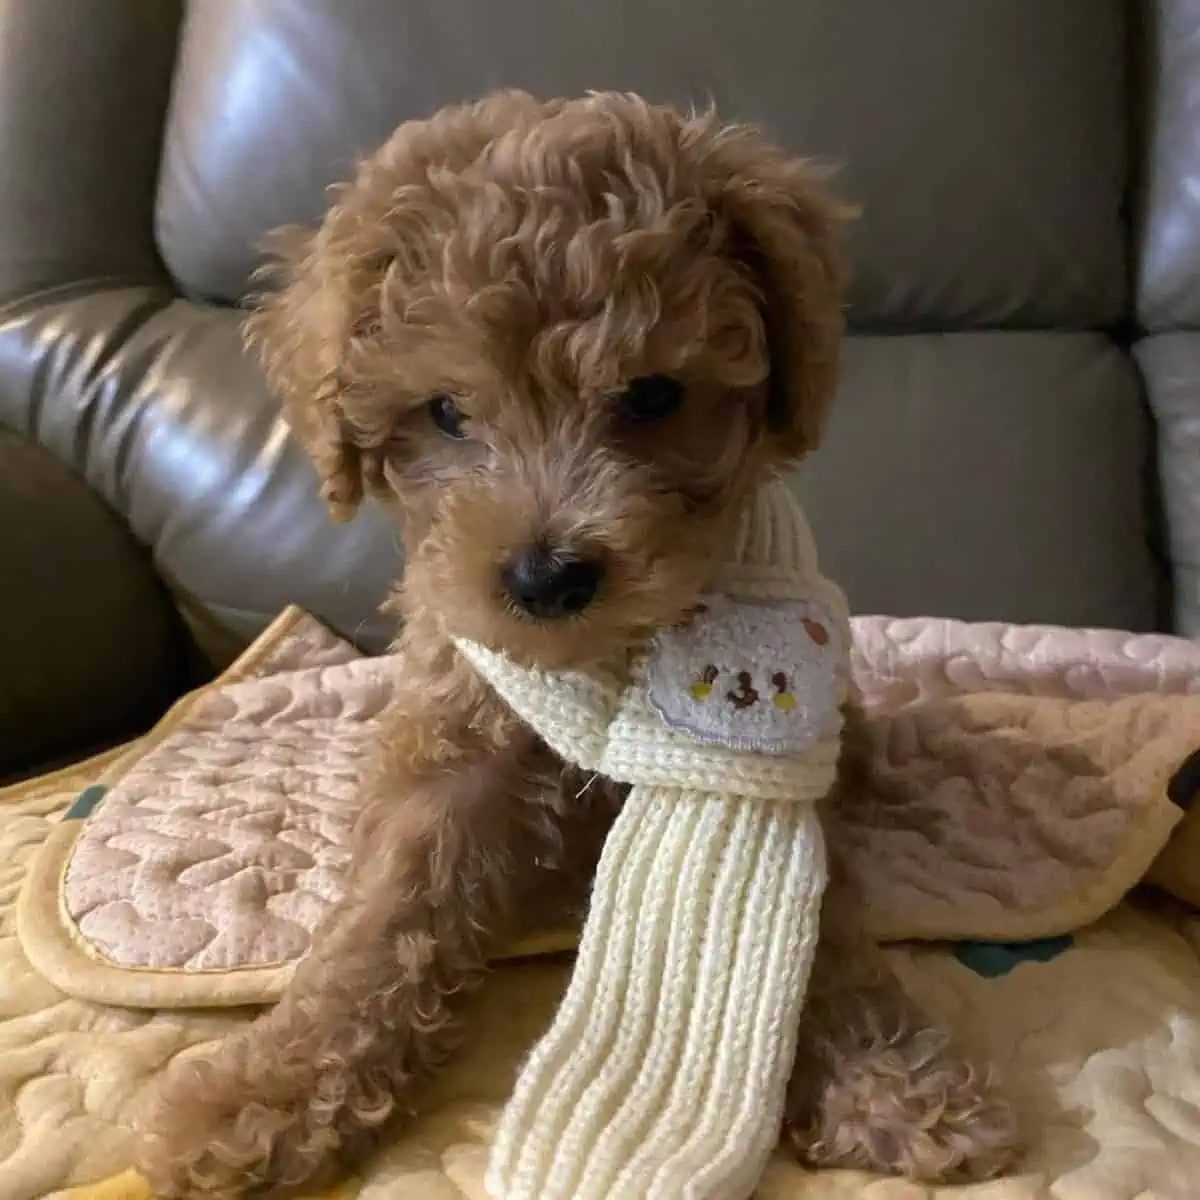 Toy Poodle puppy with scarf